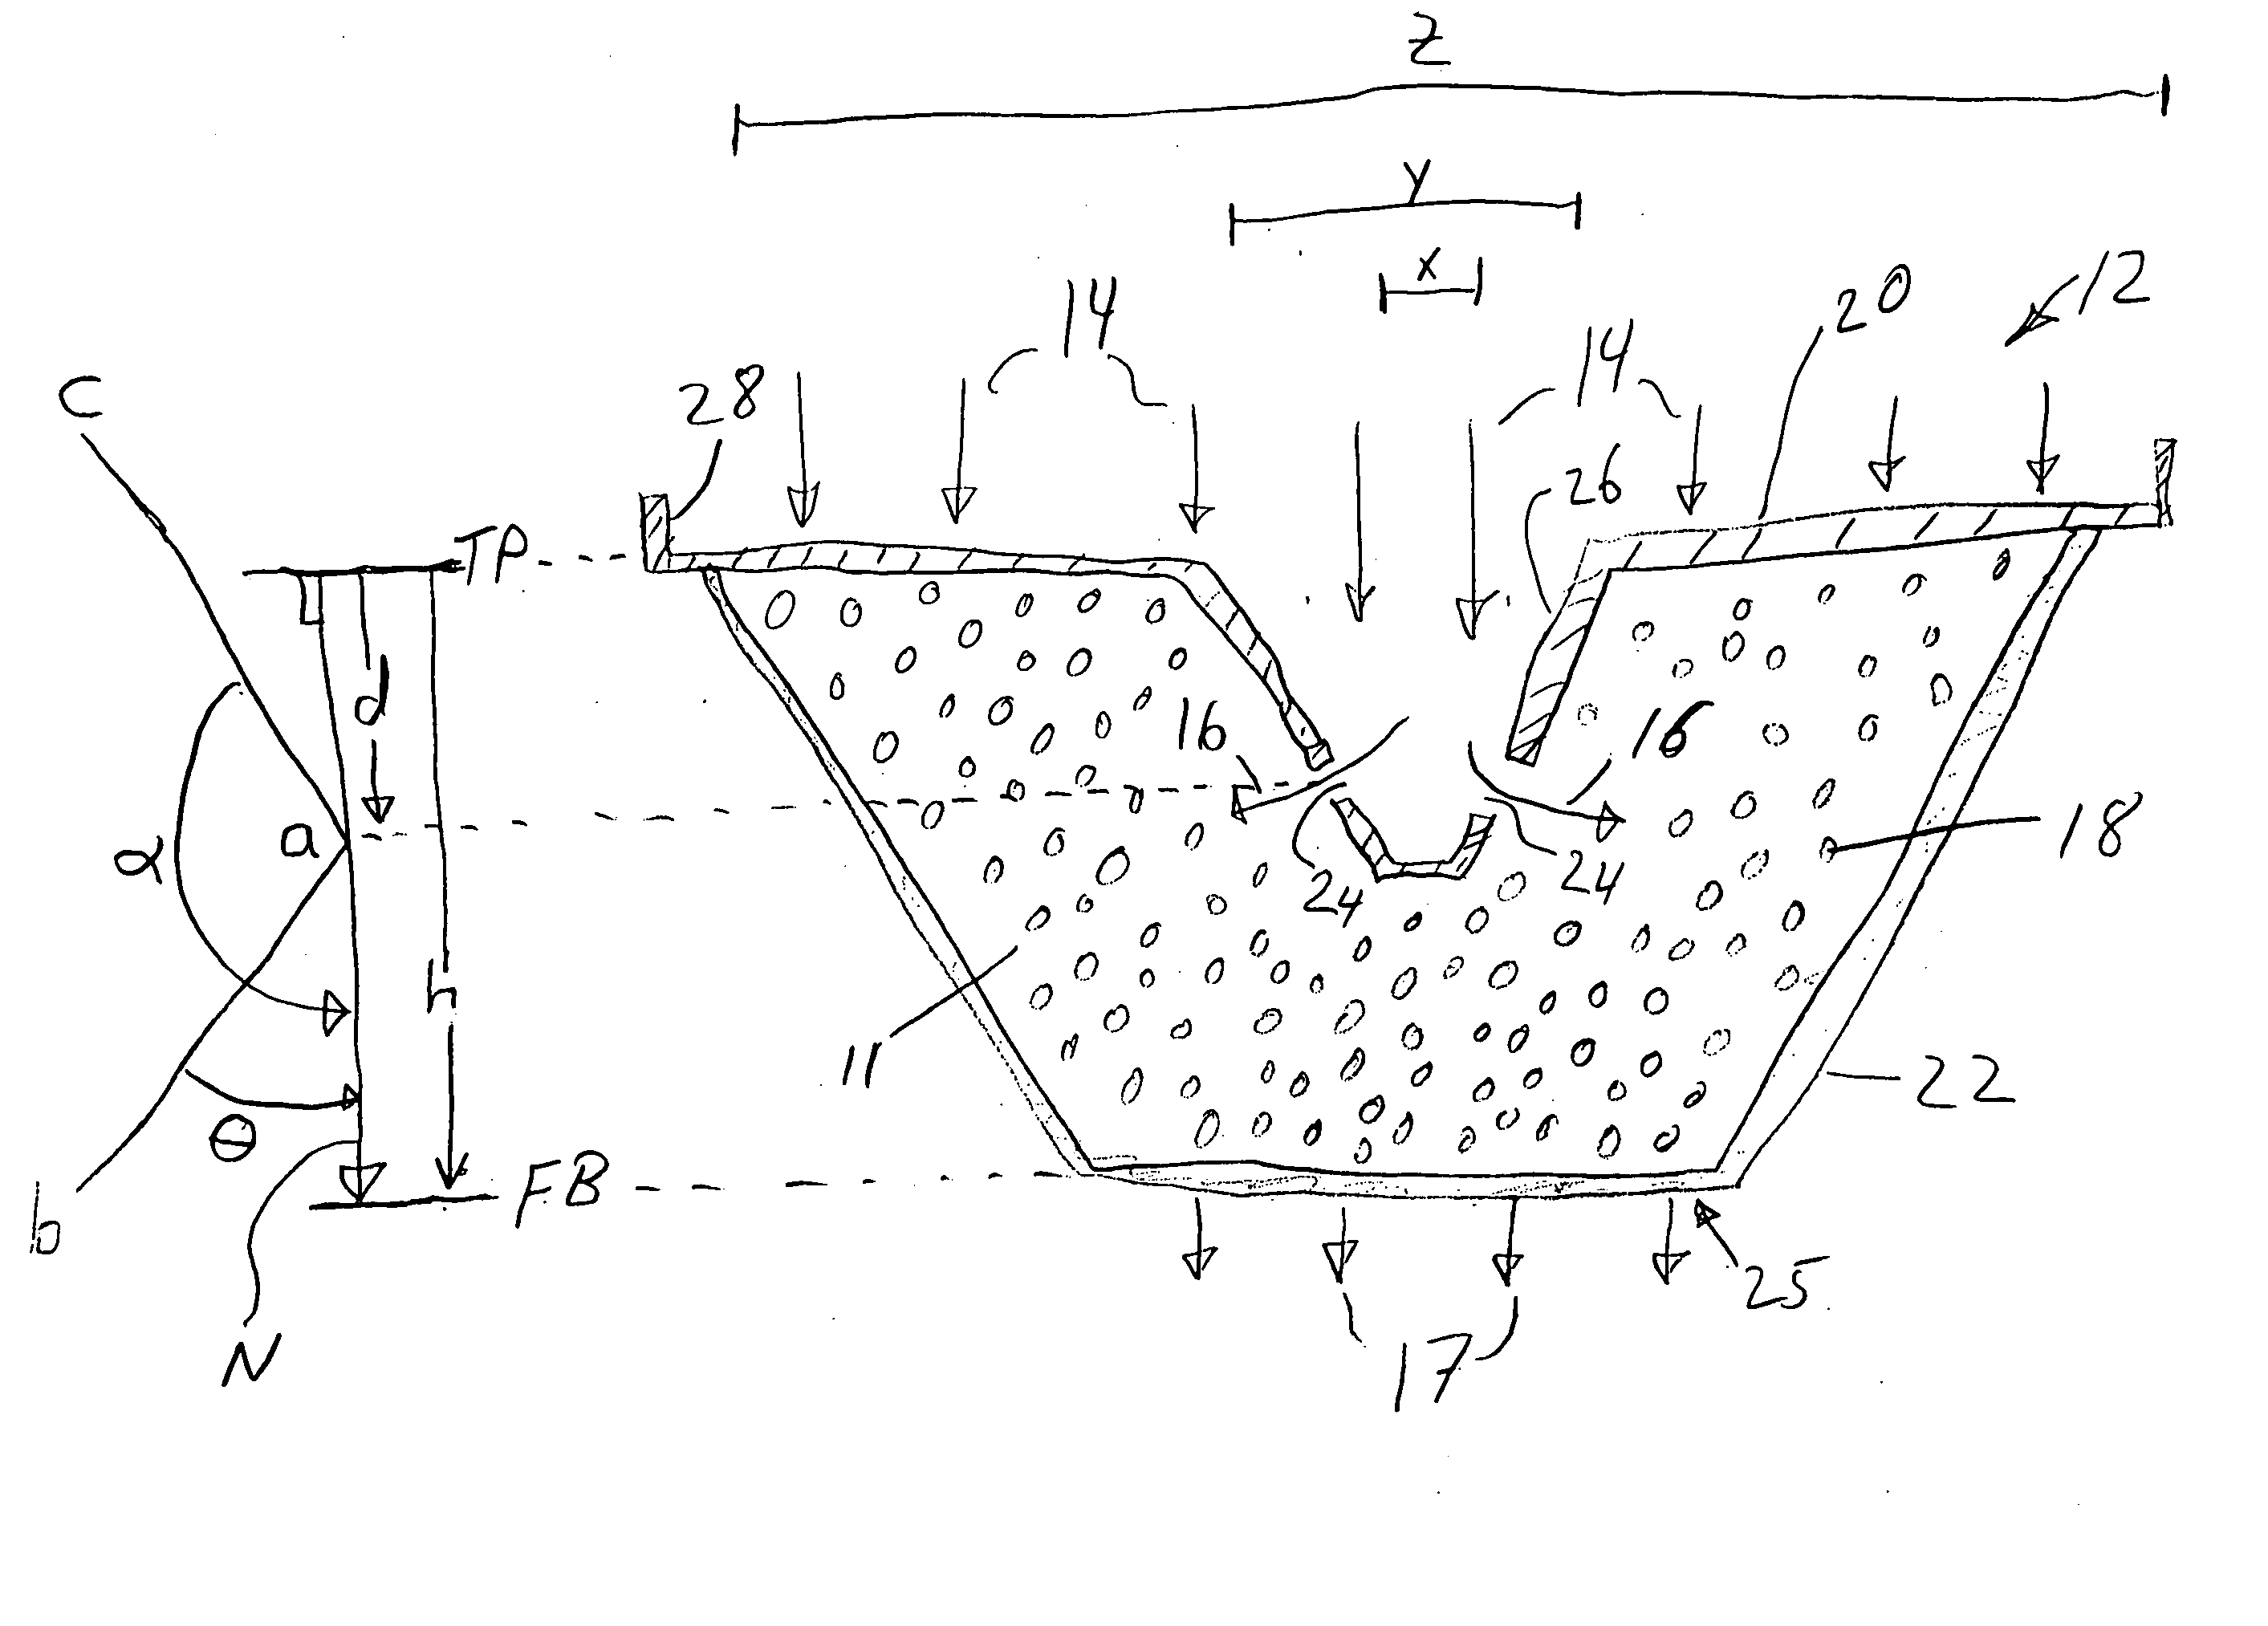 Liquid infusion pods containing insoluble materials